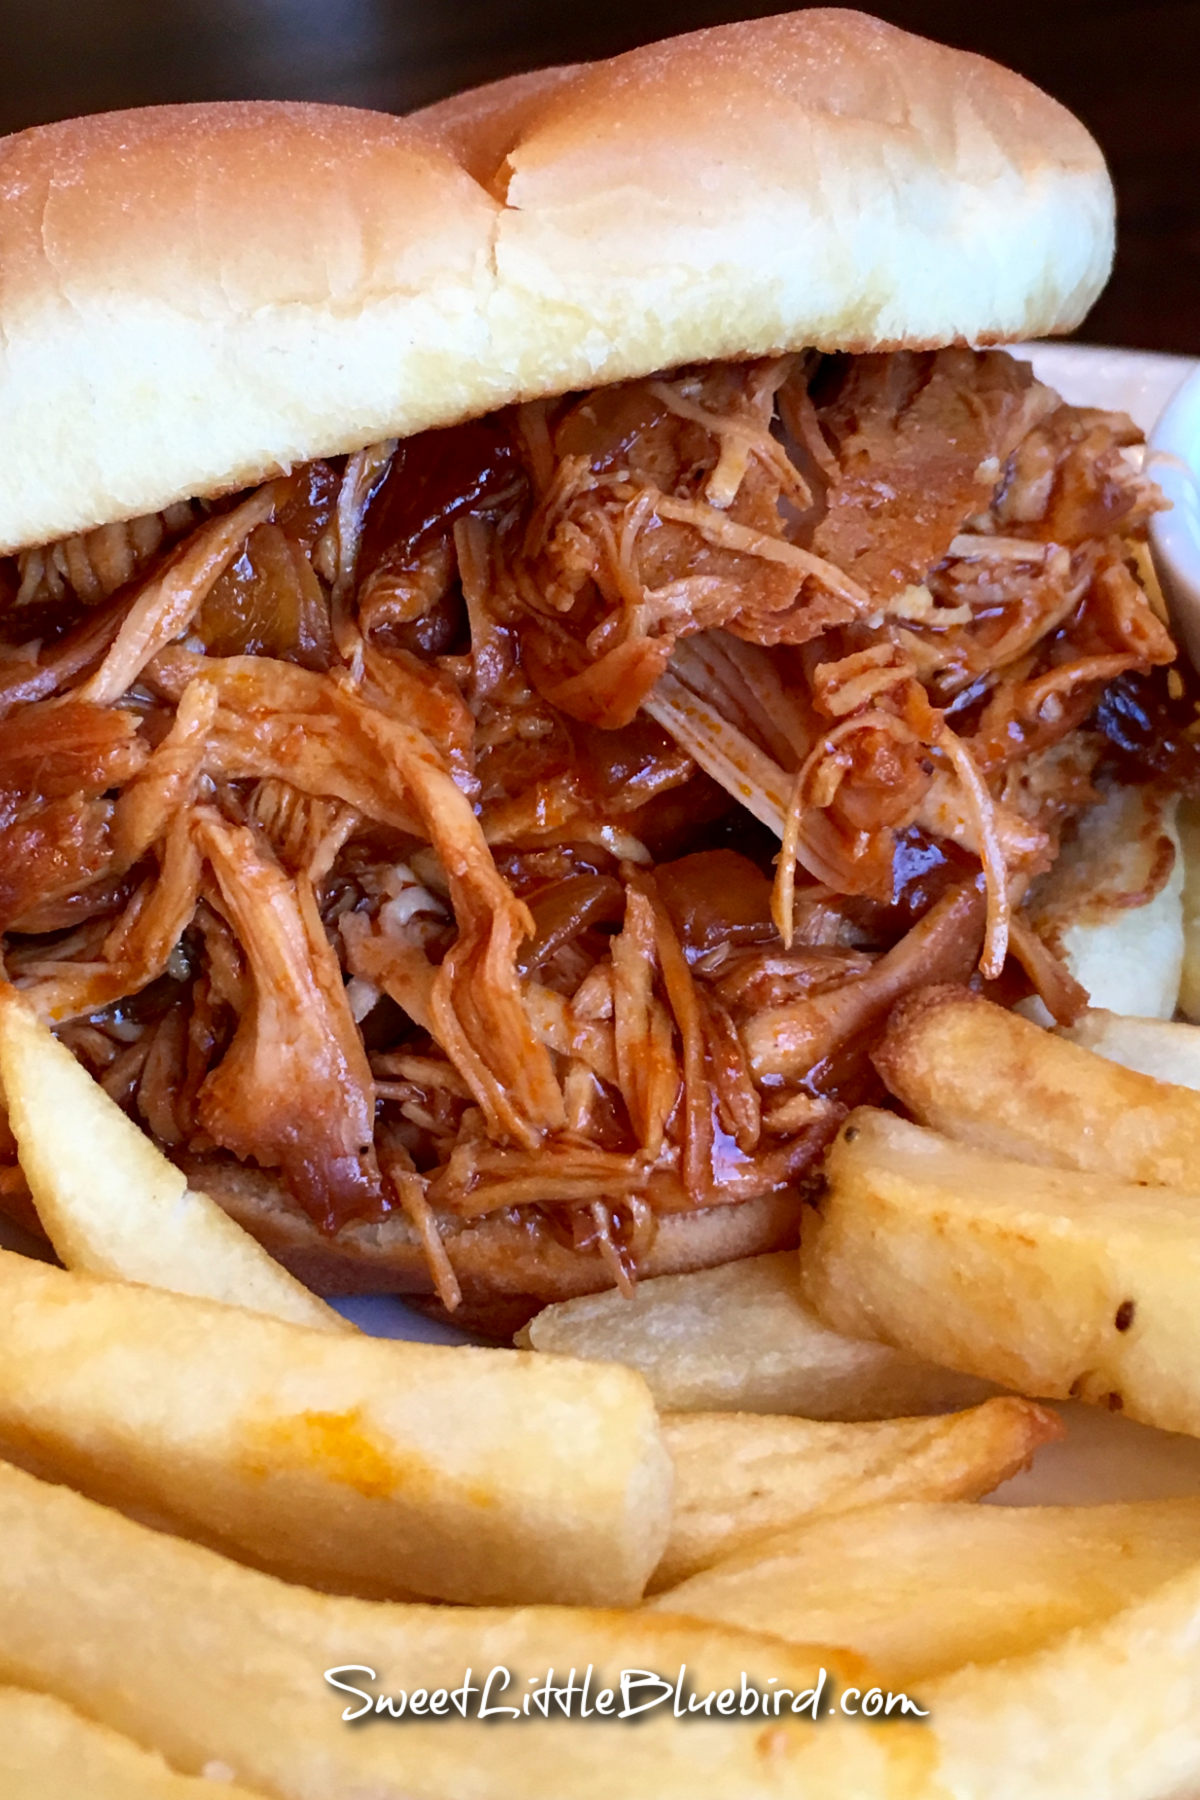 This image shows the pulled chicken served on a roll with a side of french fries.